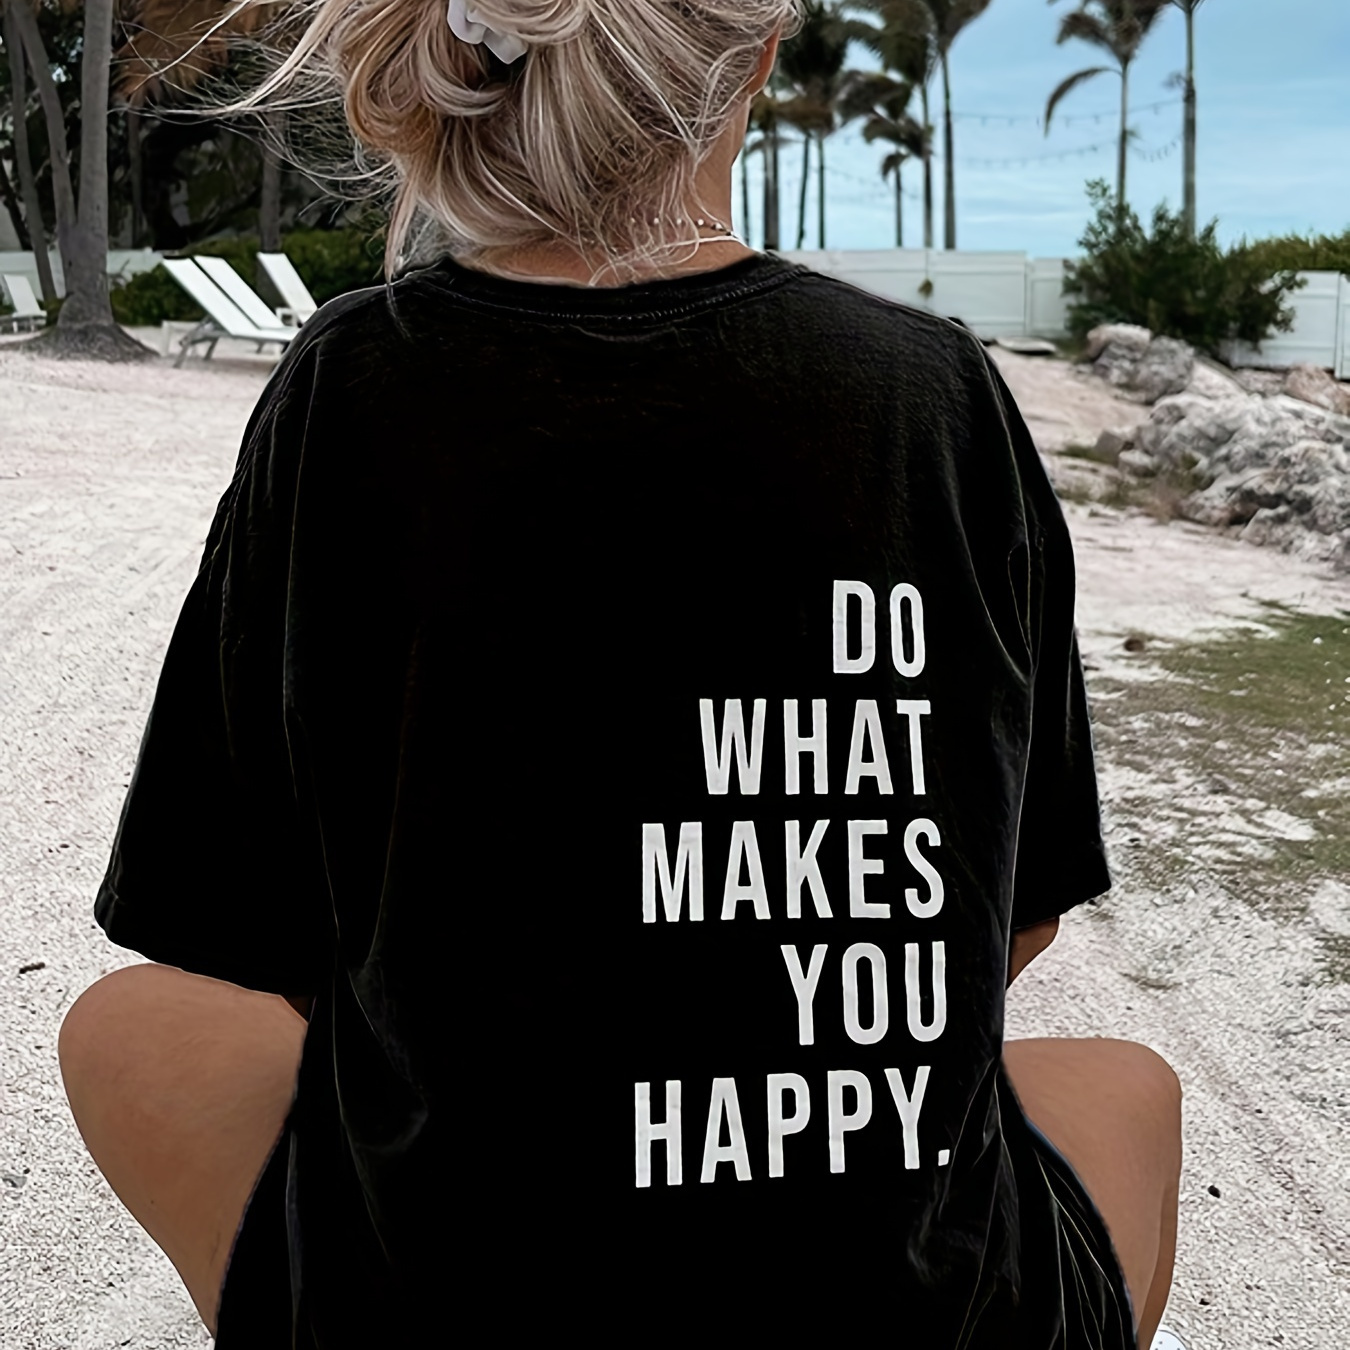 

Makes You Happy Print T-shirt, Short Sleeve Crew Neck Casual Top For Summer & Spring, Women's Clothing